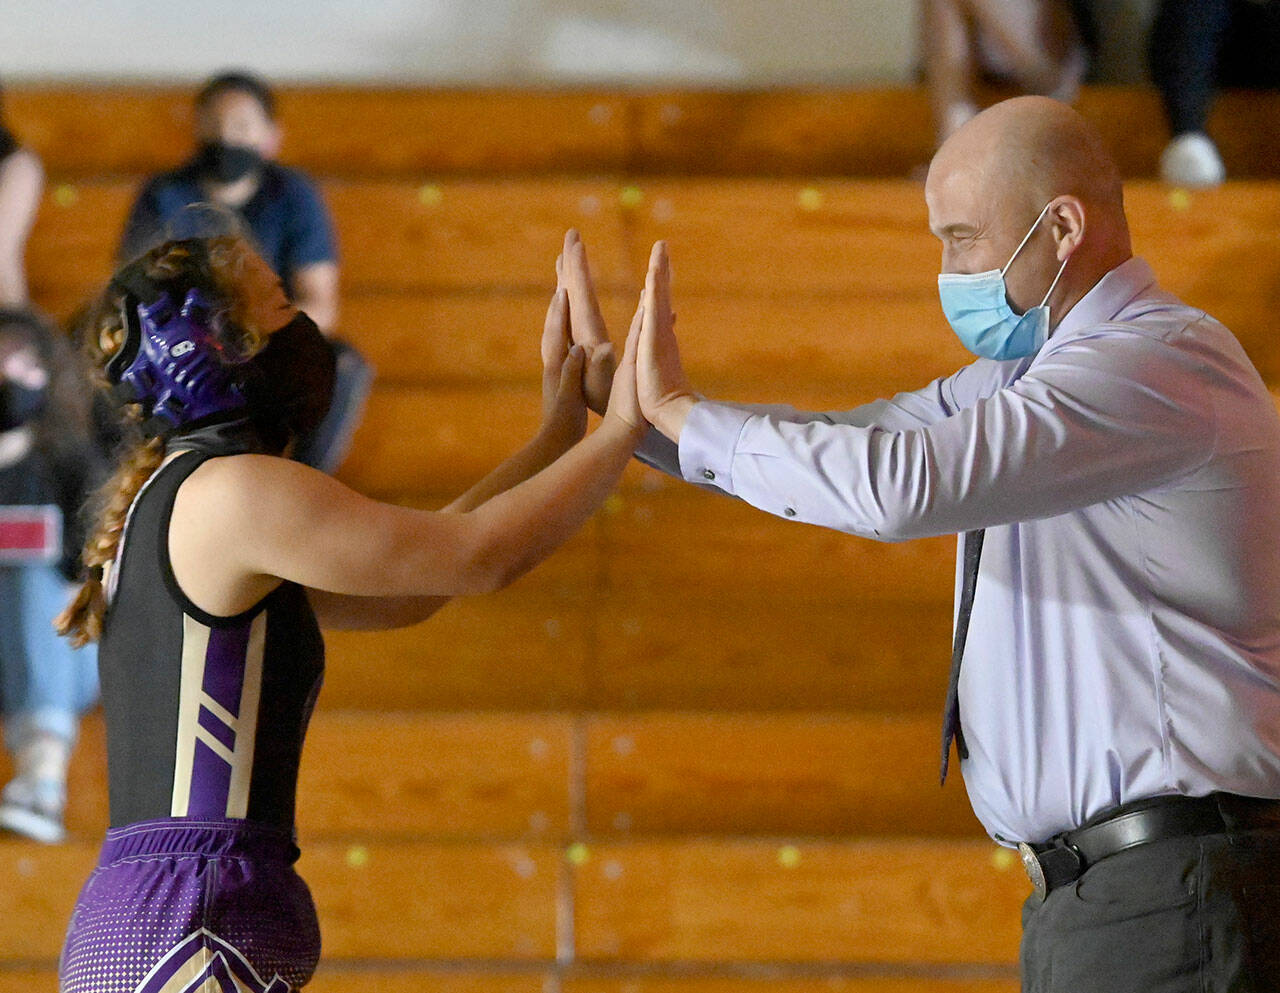 Sequim Gazette file photo by Michael Dashiell / Sequim High wrestler Jordan Hegtvedt gets congratulated by SHS coach Chad Cate after a come-from-behind win on June 5, 2021.